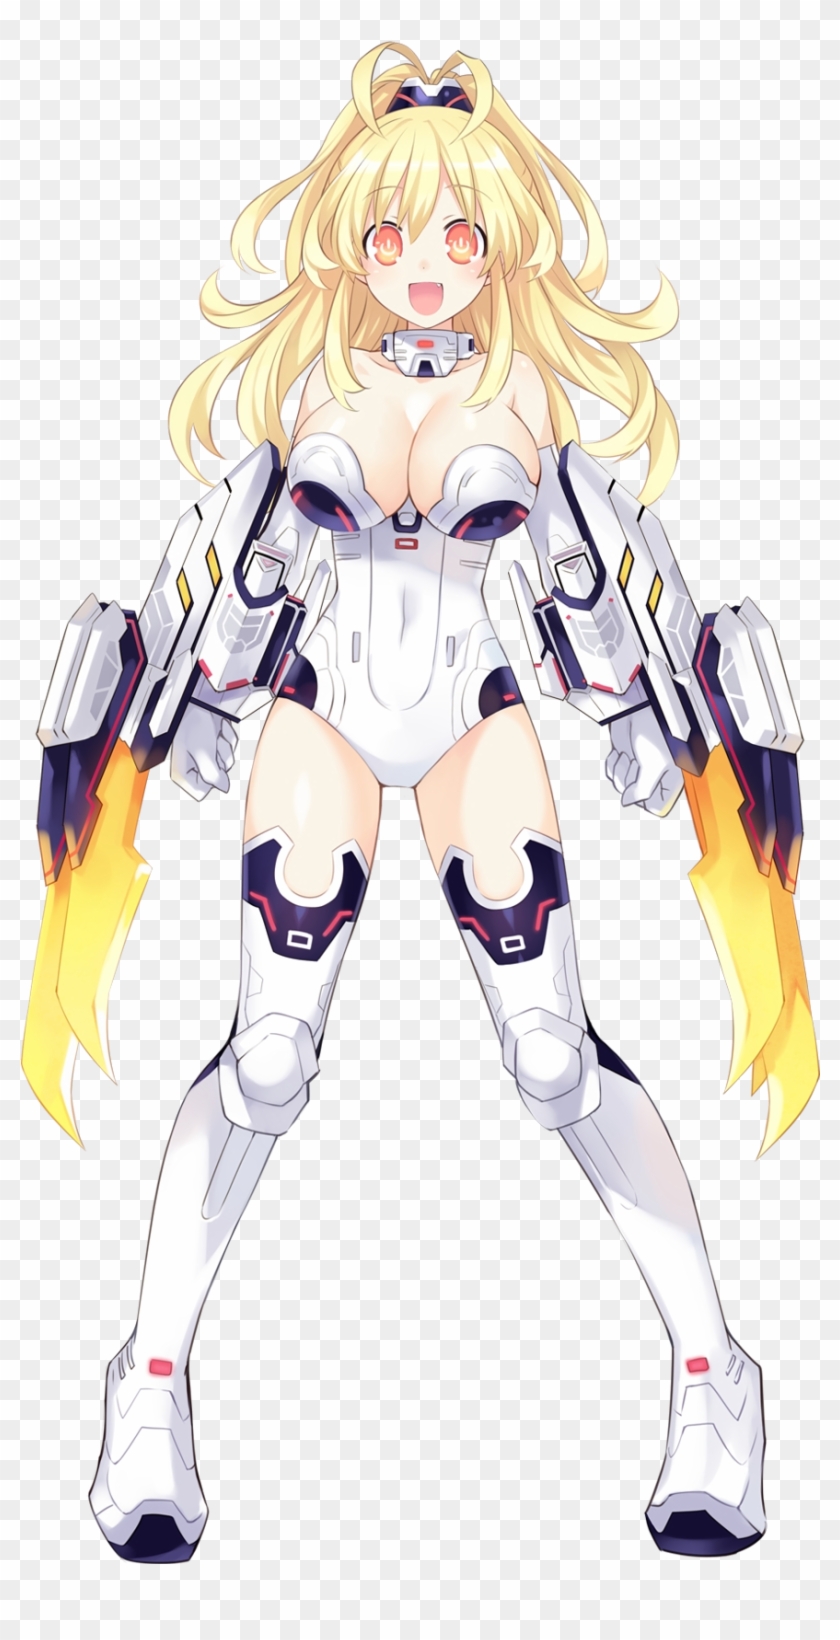 Click To Expand - Yellow Heart Hyperdimension Png #1145212